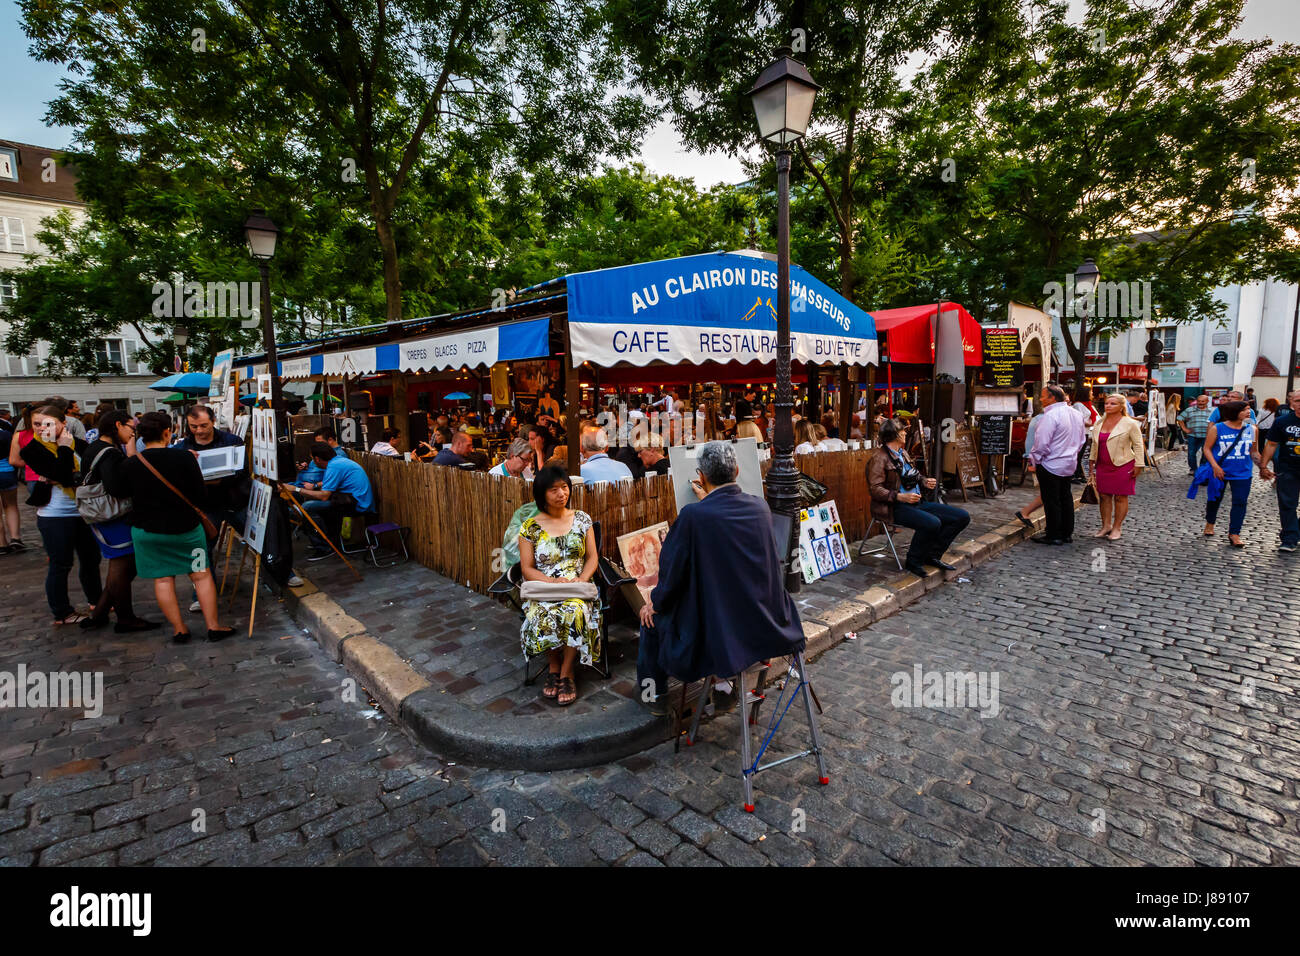 PARIS - JULY 1: Place du Tertre in Montmartre, Paris with street artists and paintings on July 1, 2013. The area once attracted famous modern artists  Stock Photo